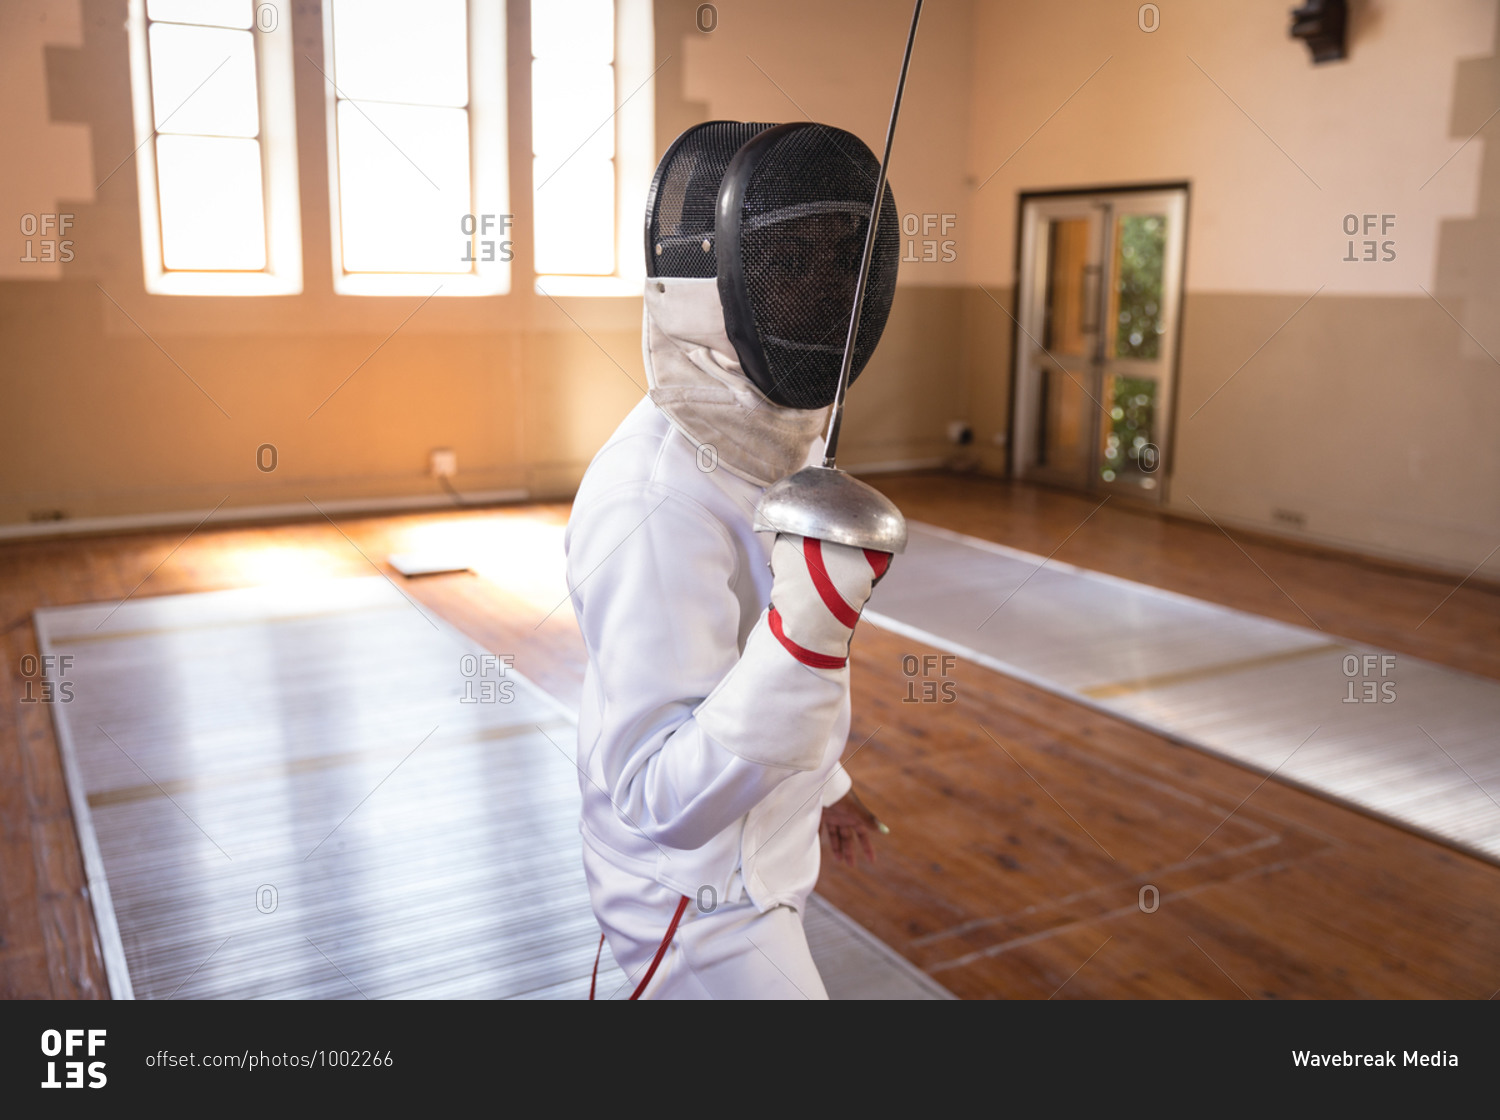 Caucasian sportswoman wearing protective fencing outfit during a fencing  training session, preparing for a duel, holding an epee in front of face.  Fencers training at a gym. - Stock Image - Everypixel